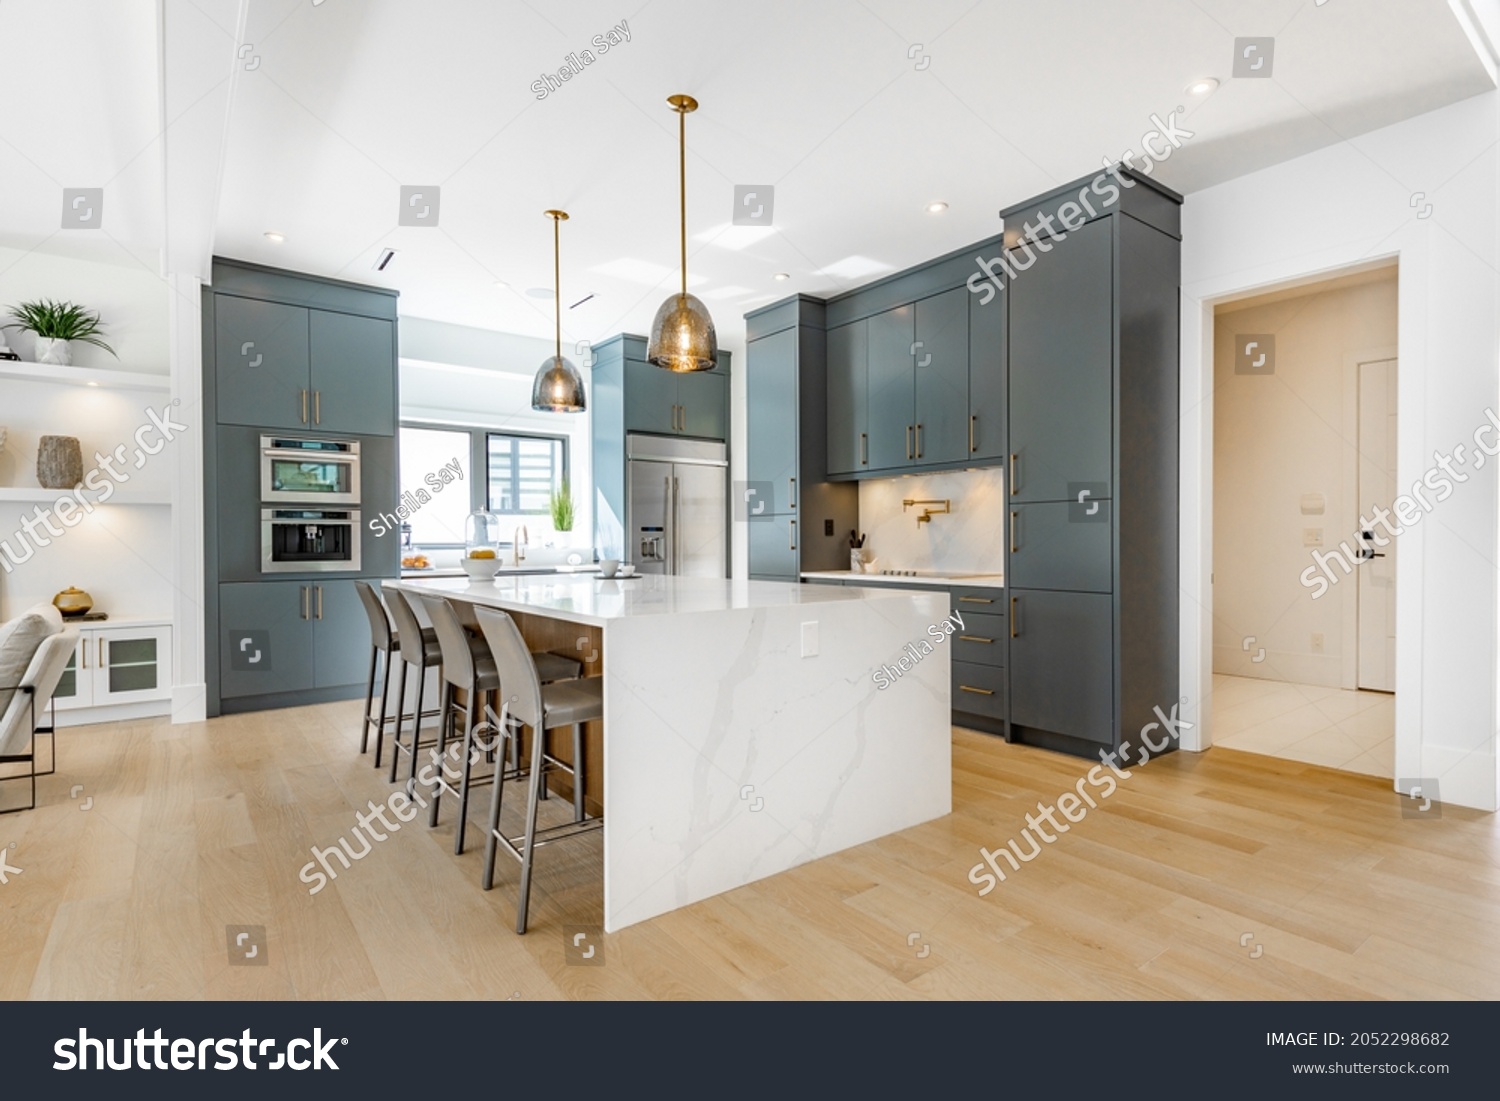 contemporary kitchen spice kitchen with grey cabinets white marble counter top sinks range appliances eating counter and pendant lights #2052298682